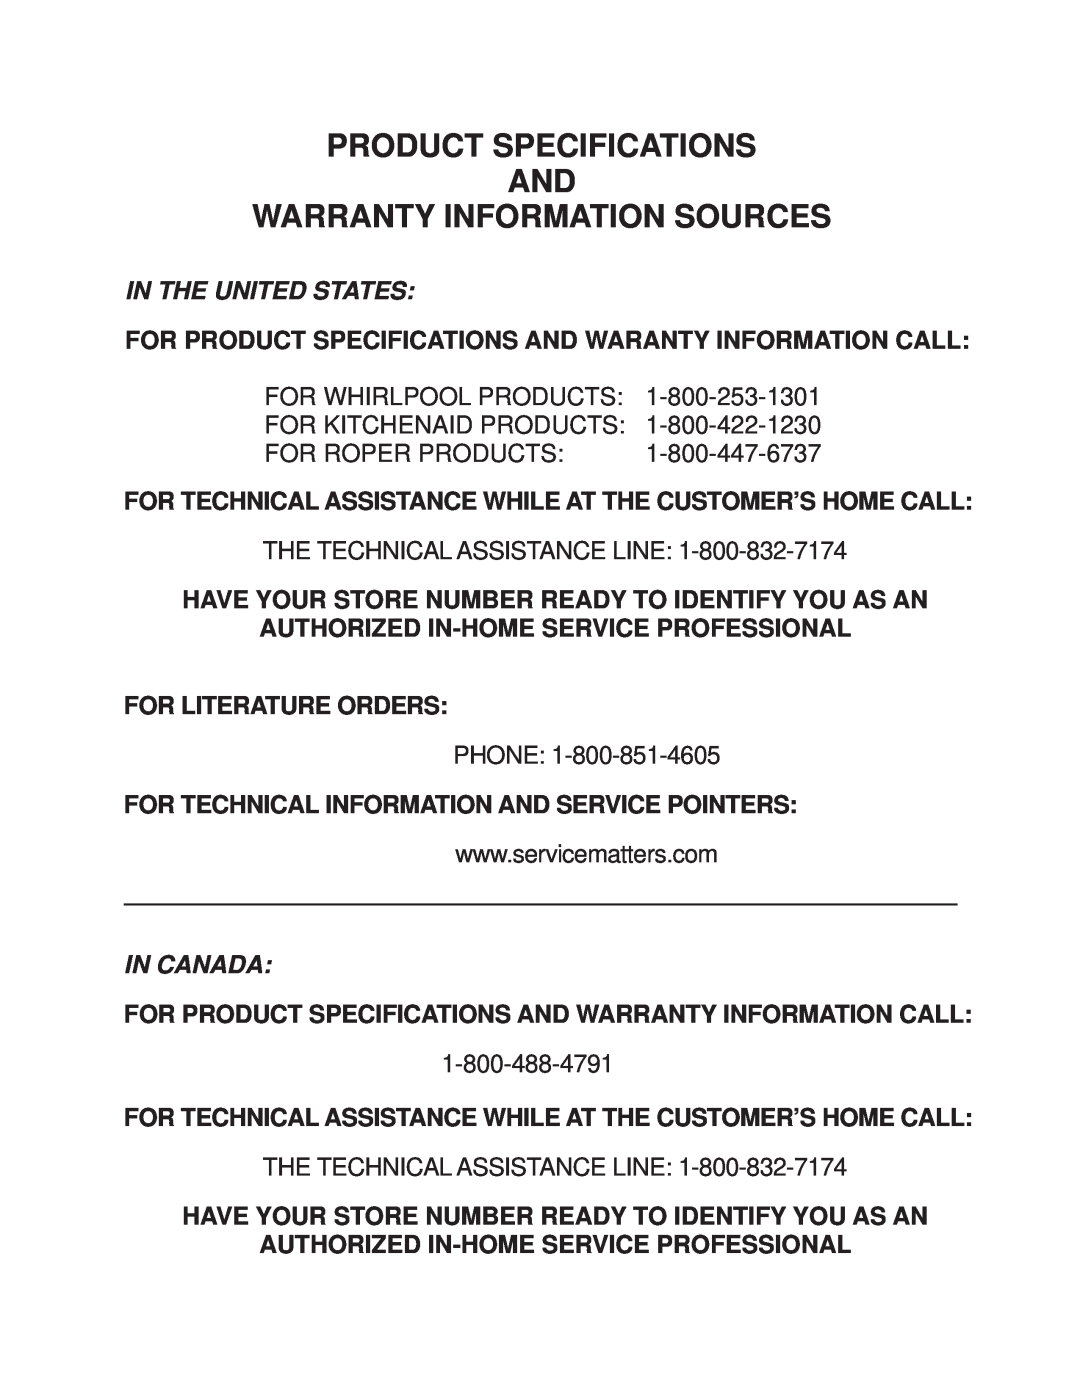 Whirlpool KUIA15NRH*11 Product Specifications And Warranty Information Sources, In The United States, For Roper Products 